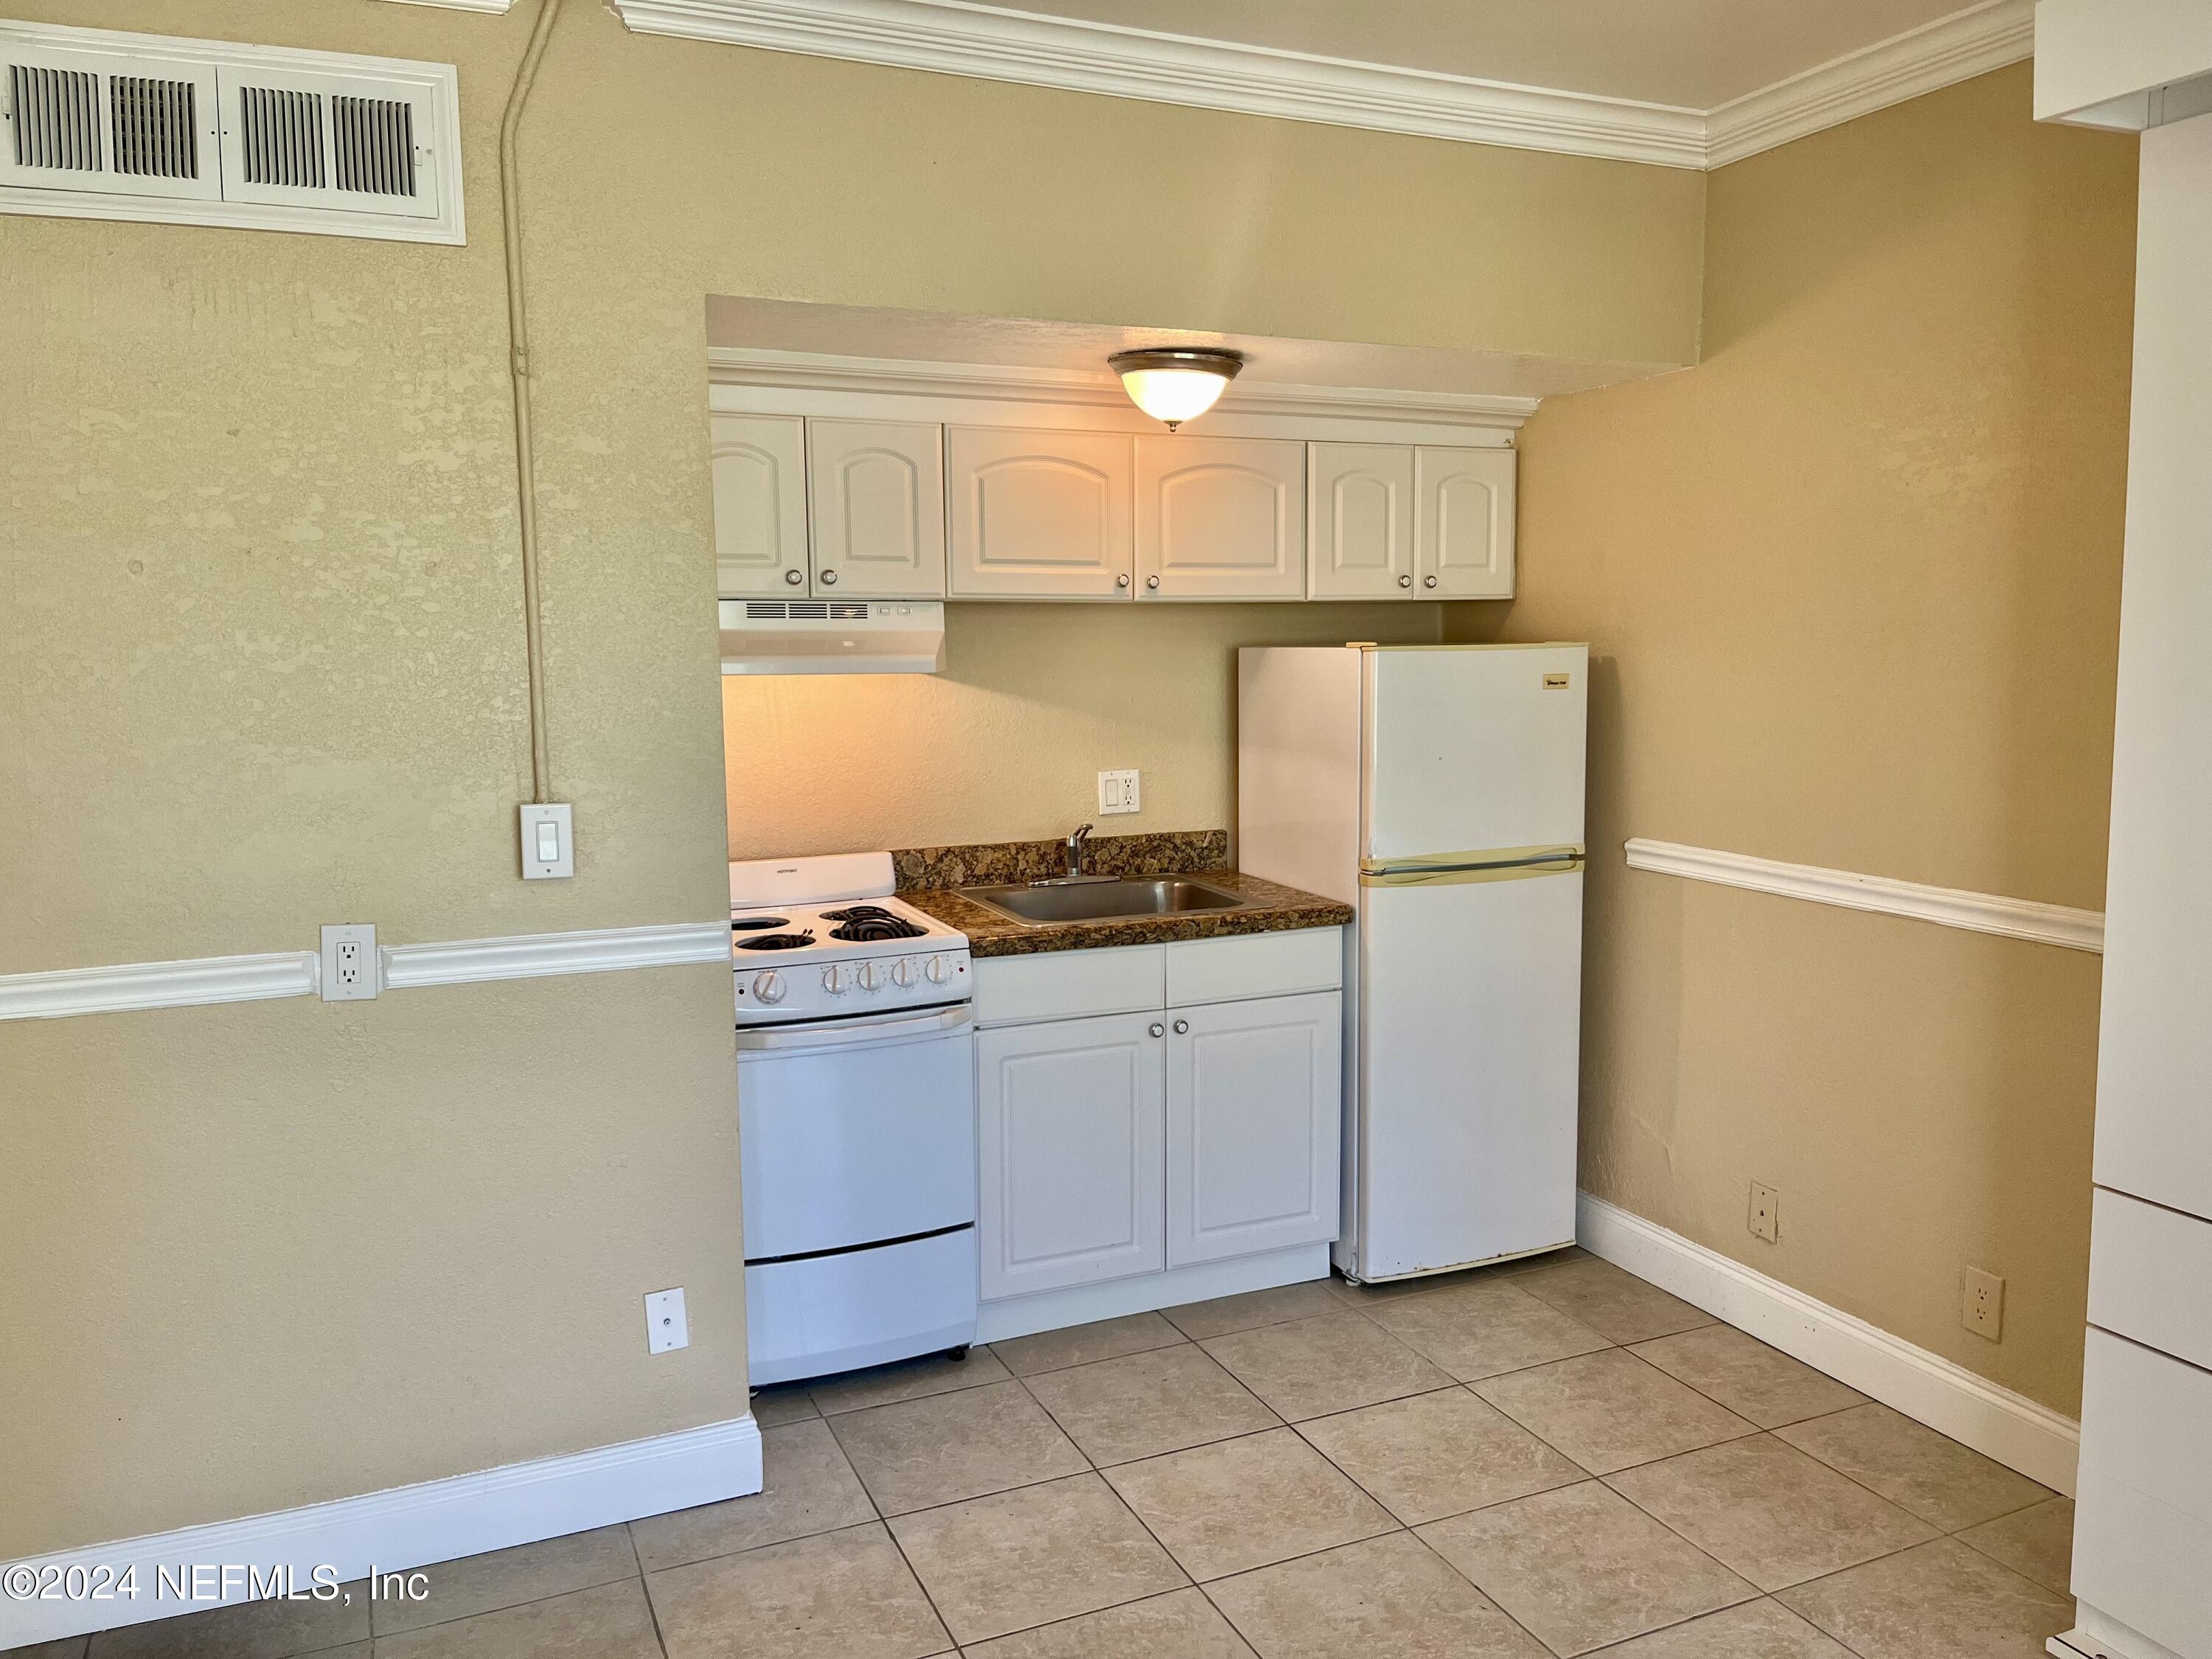 Jacksonville, FL home for sale located at 311 W Ashley Street Unit 311, Jacksonville, FL 32202